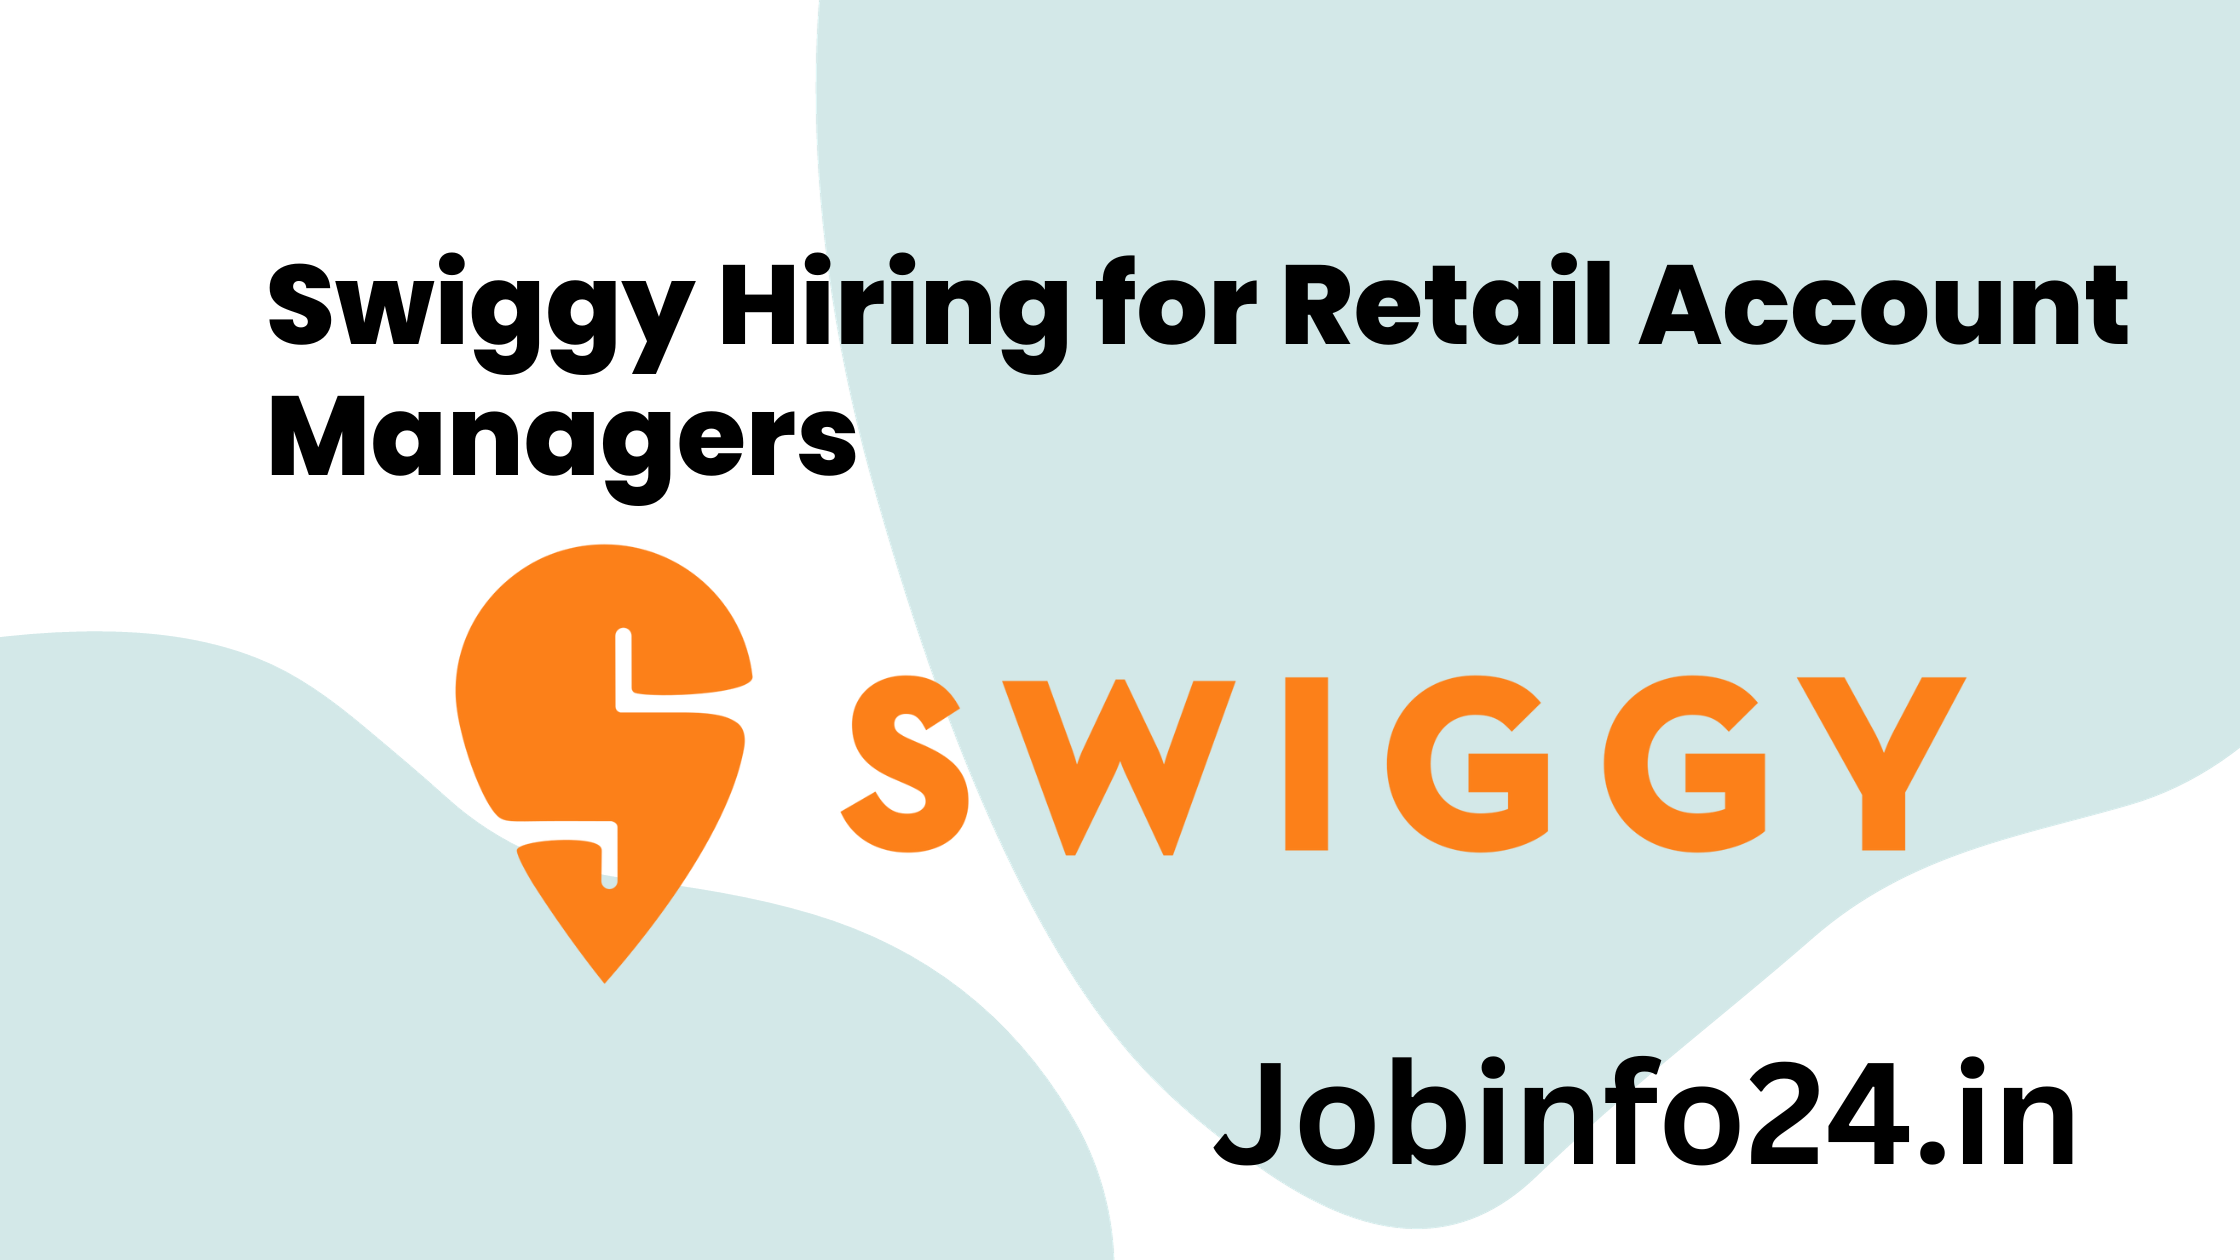 Swiggy Hiring for Retail Account Managers